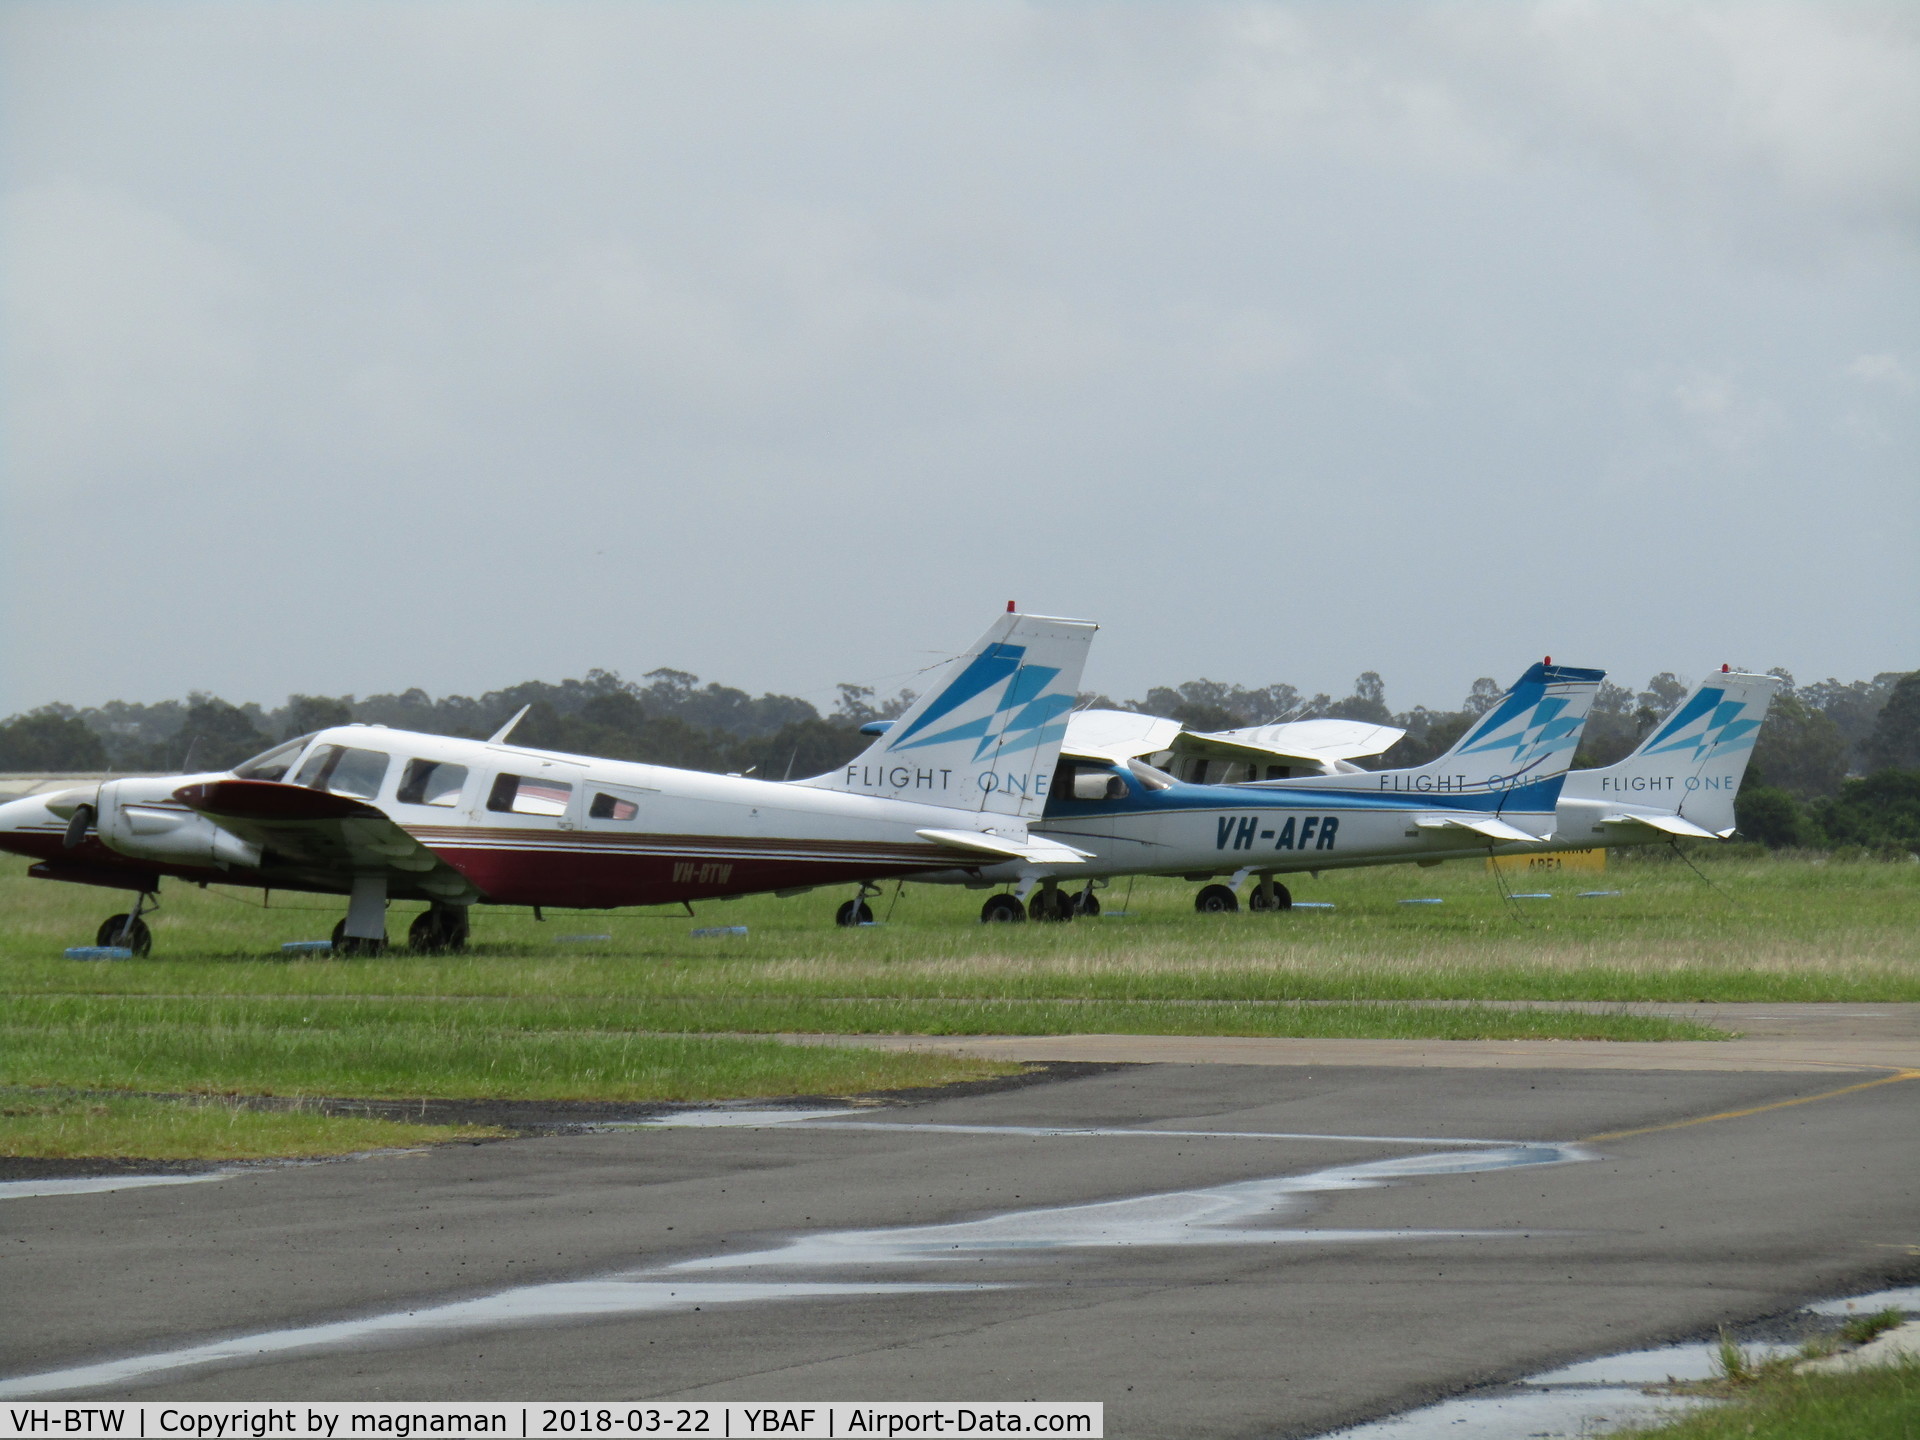 VH-BTW, 1974 Piper PA-34-200 Seneca C/N 34-7450107, along with two colleagues at YBAF